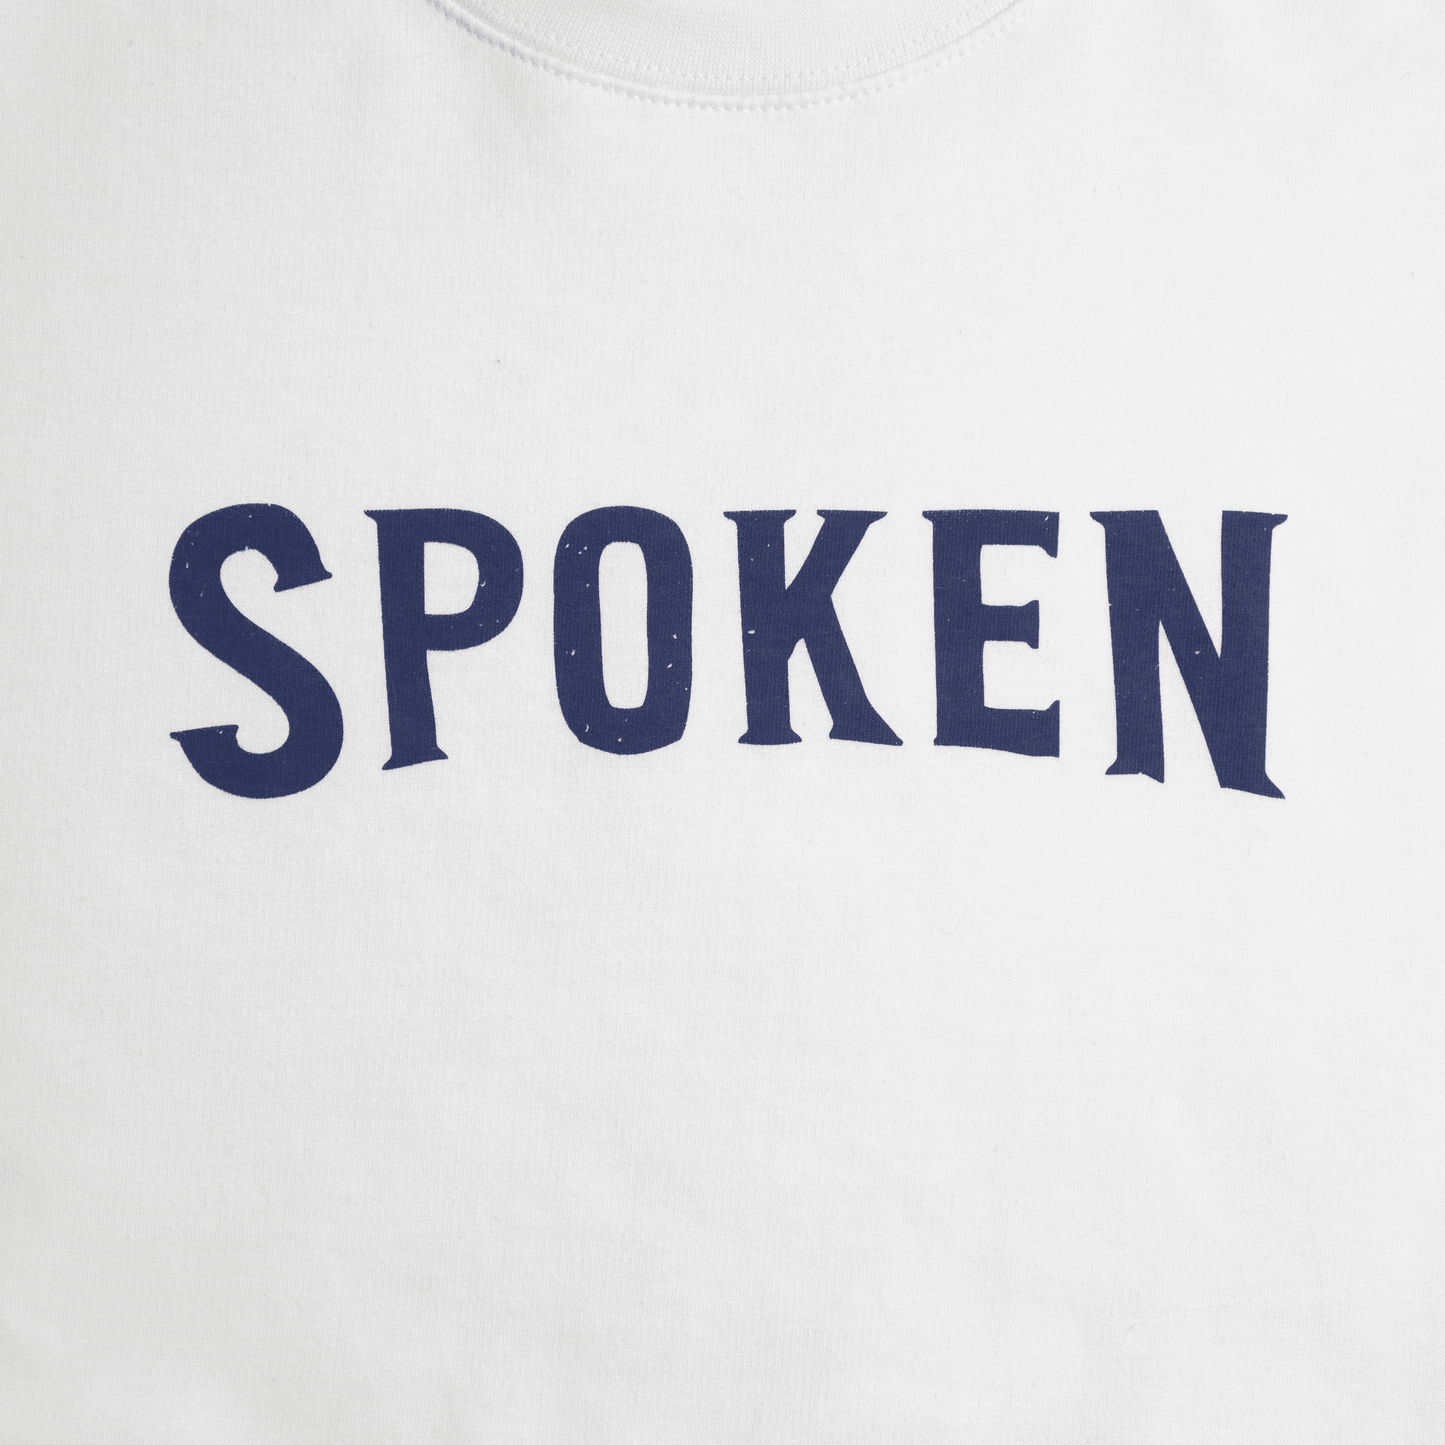 Detail shot of the blue "Spoken" featured on the front of the crewneck.